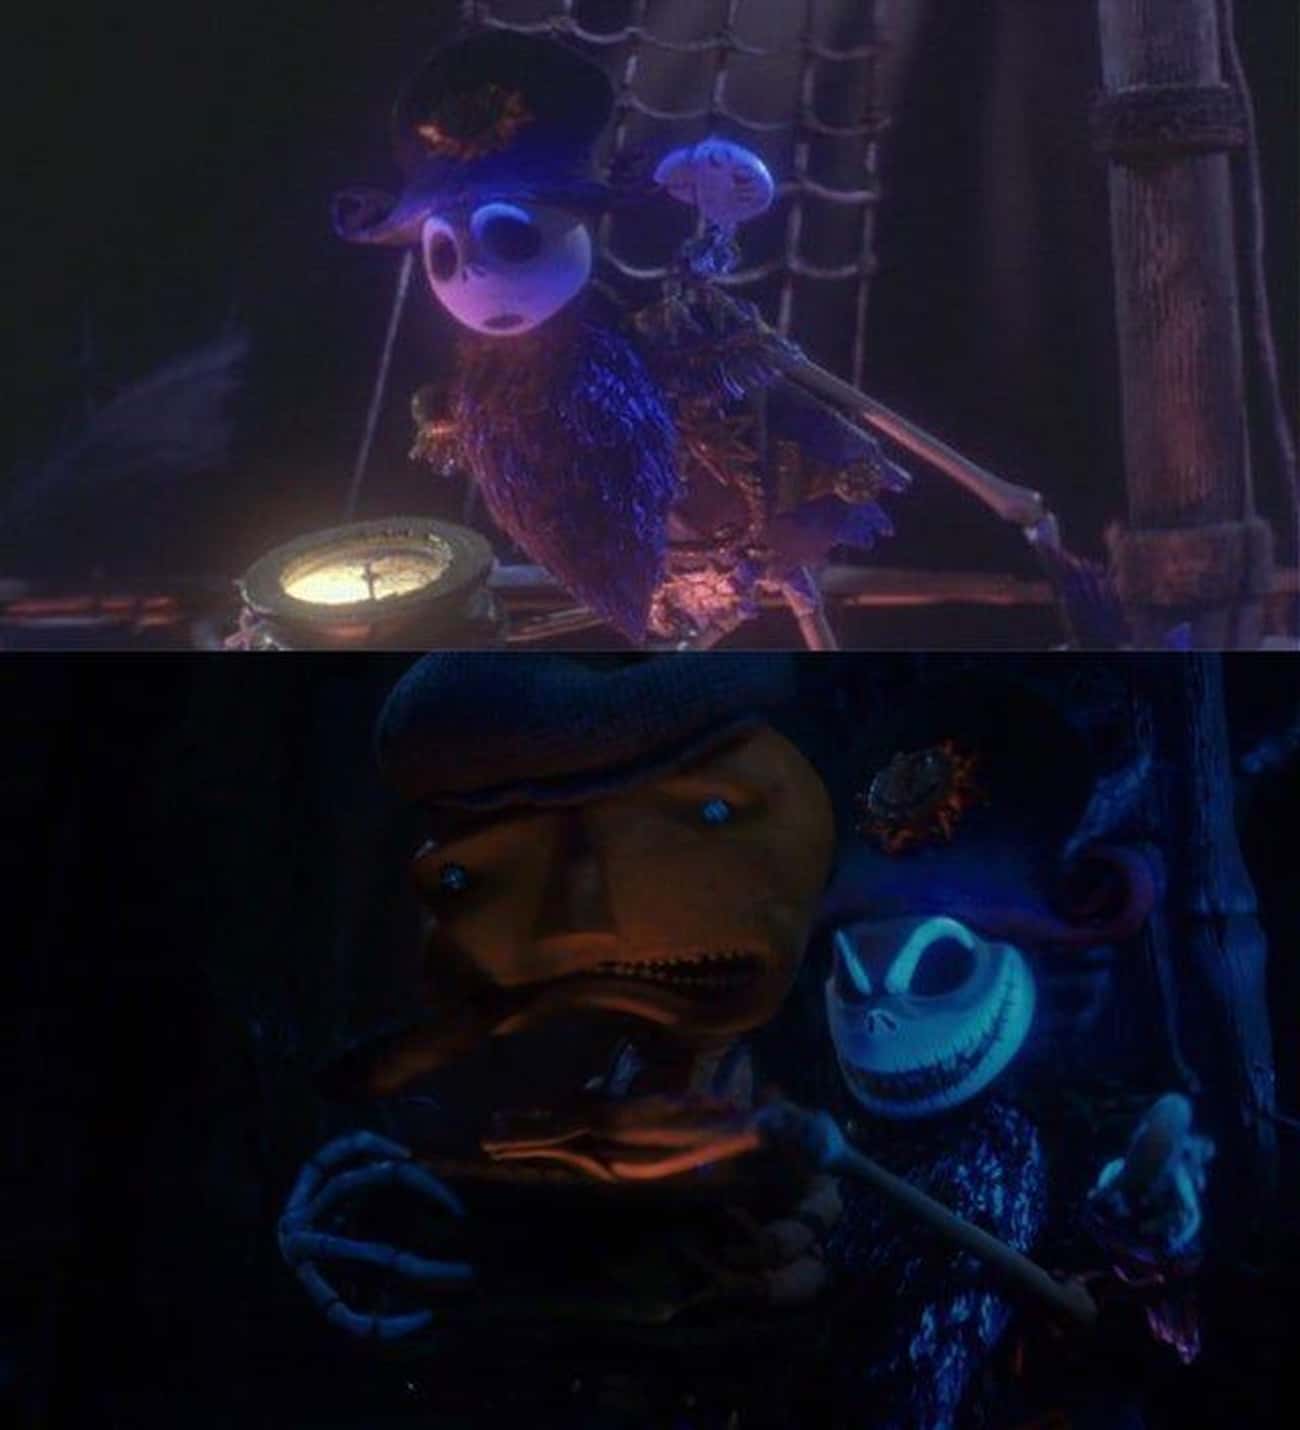 Jack Skellington Mans The Ghost Ship In 'James And The Giant Peach'